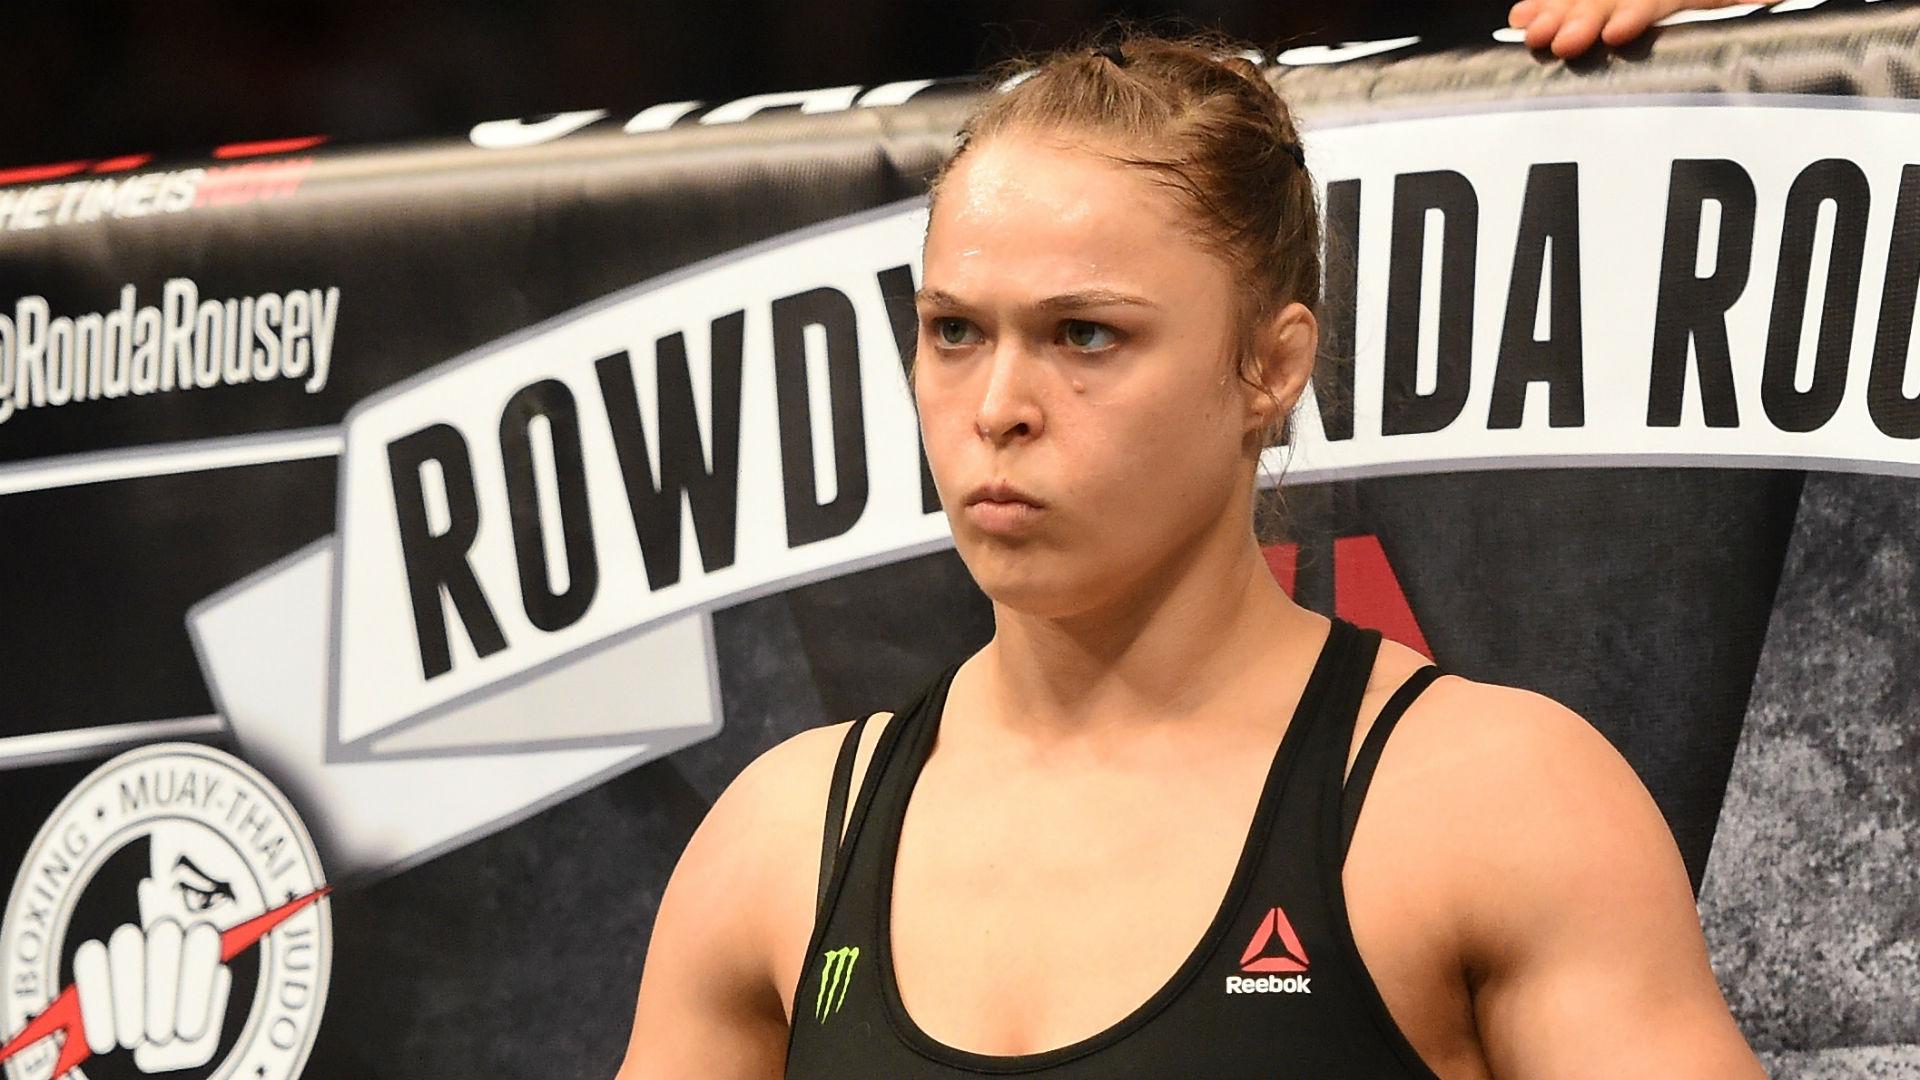 denise gaskill recommends Ronda Rousey In Nude